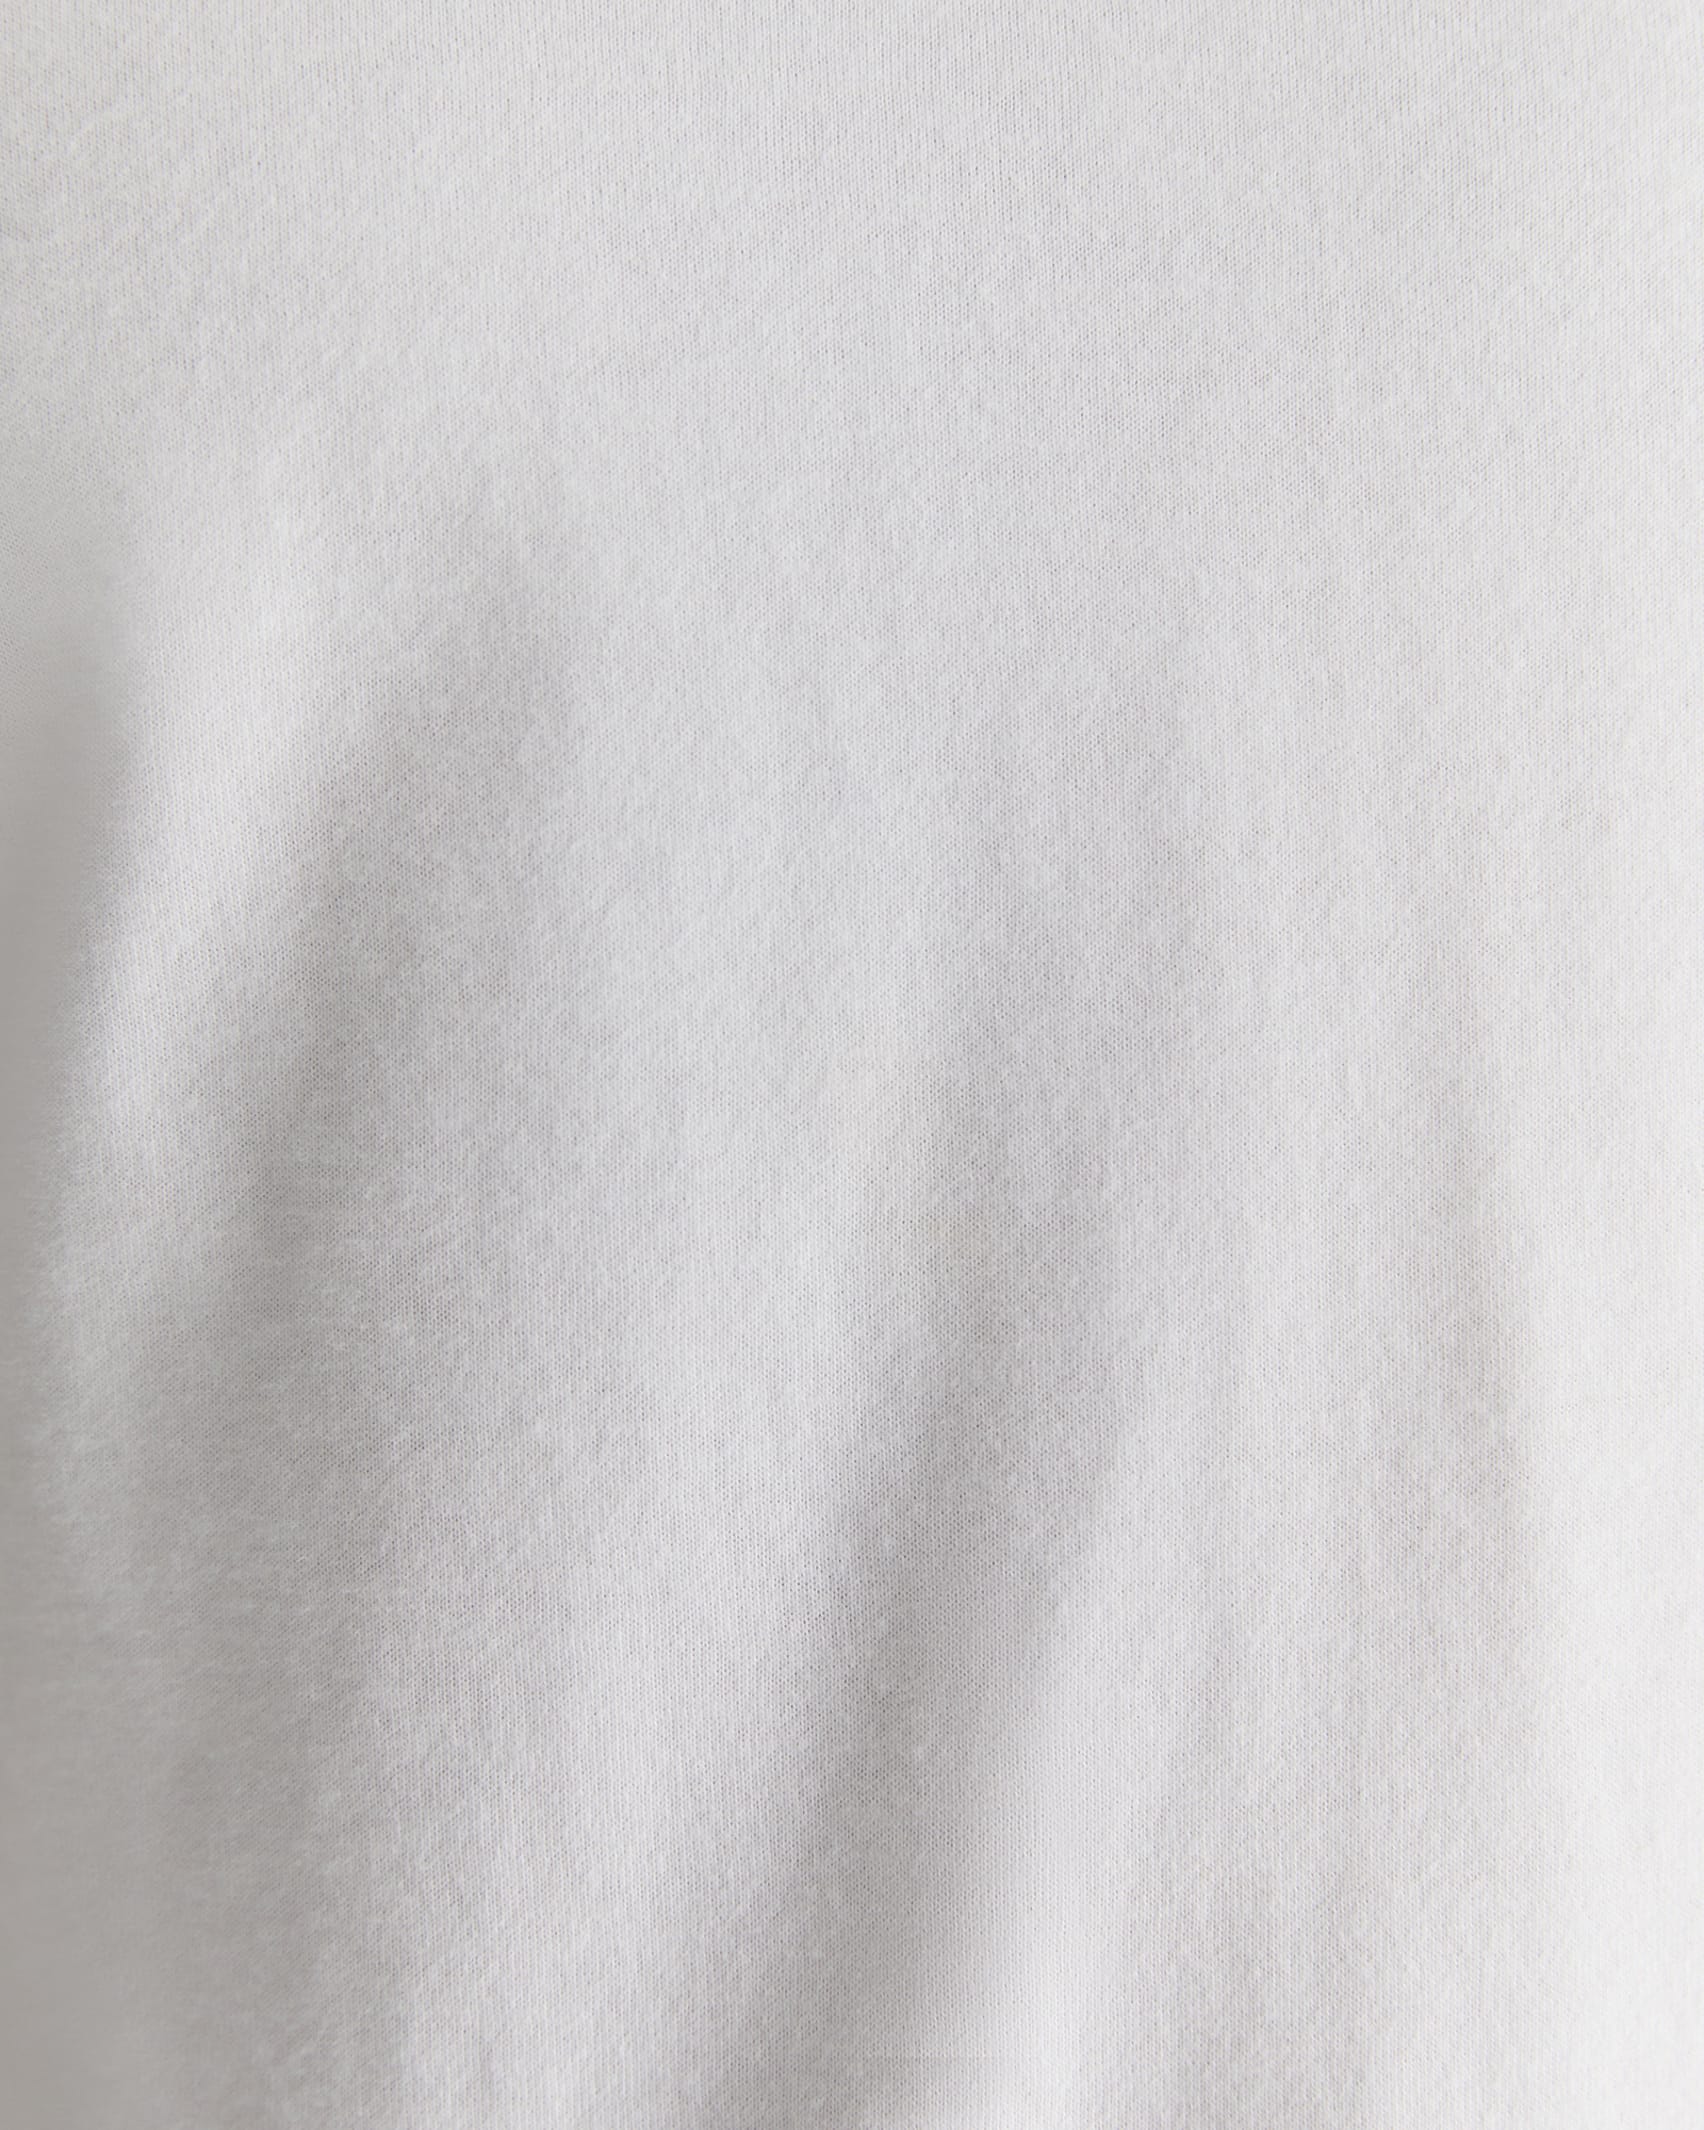 Supersoft Tee in WHITE